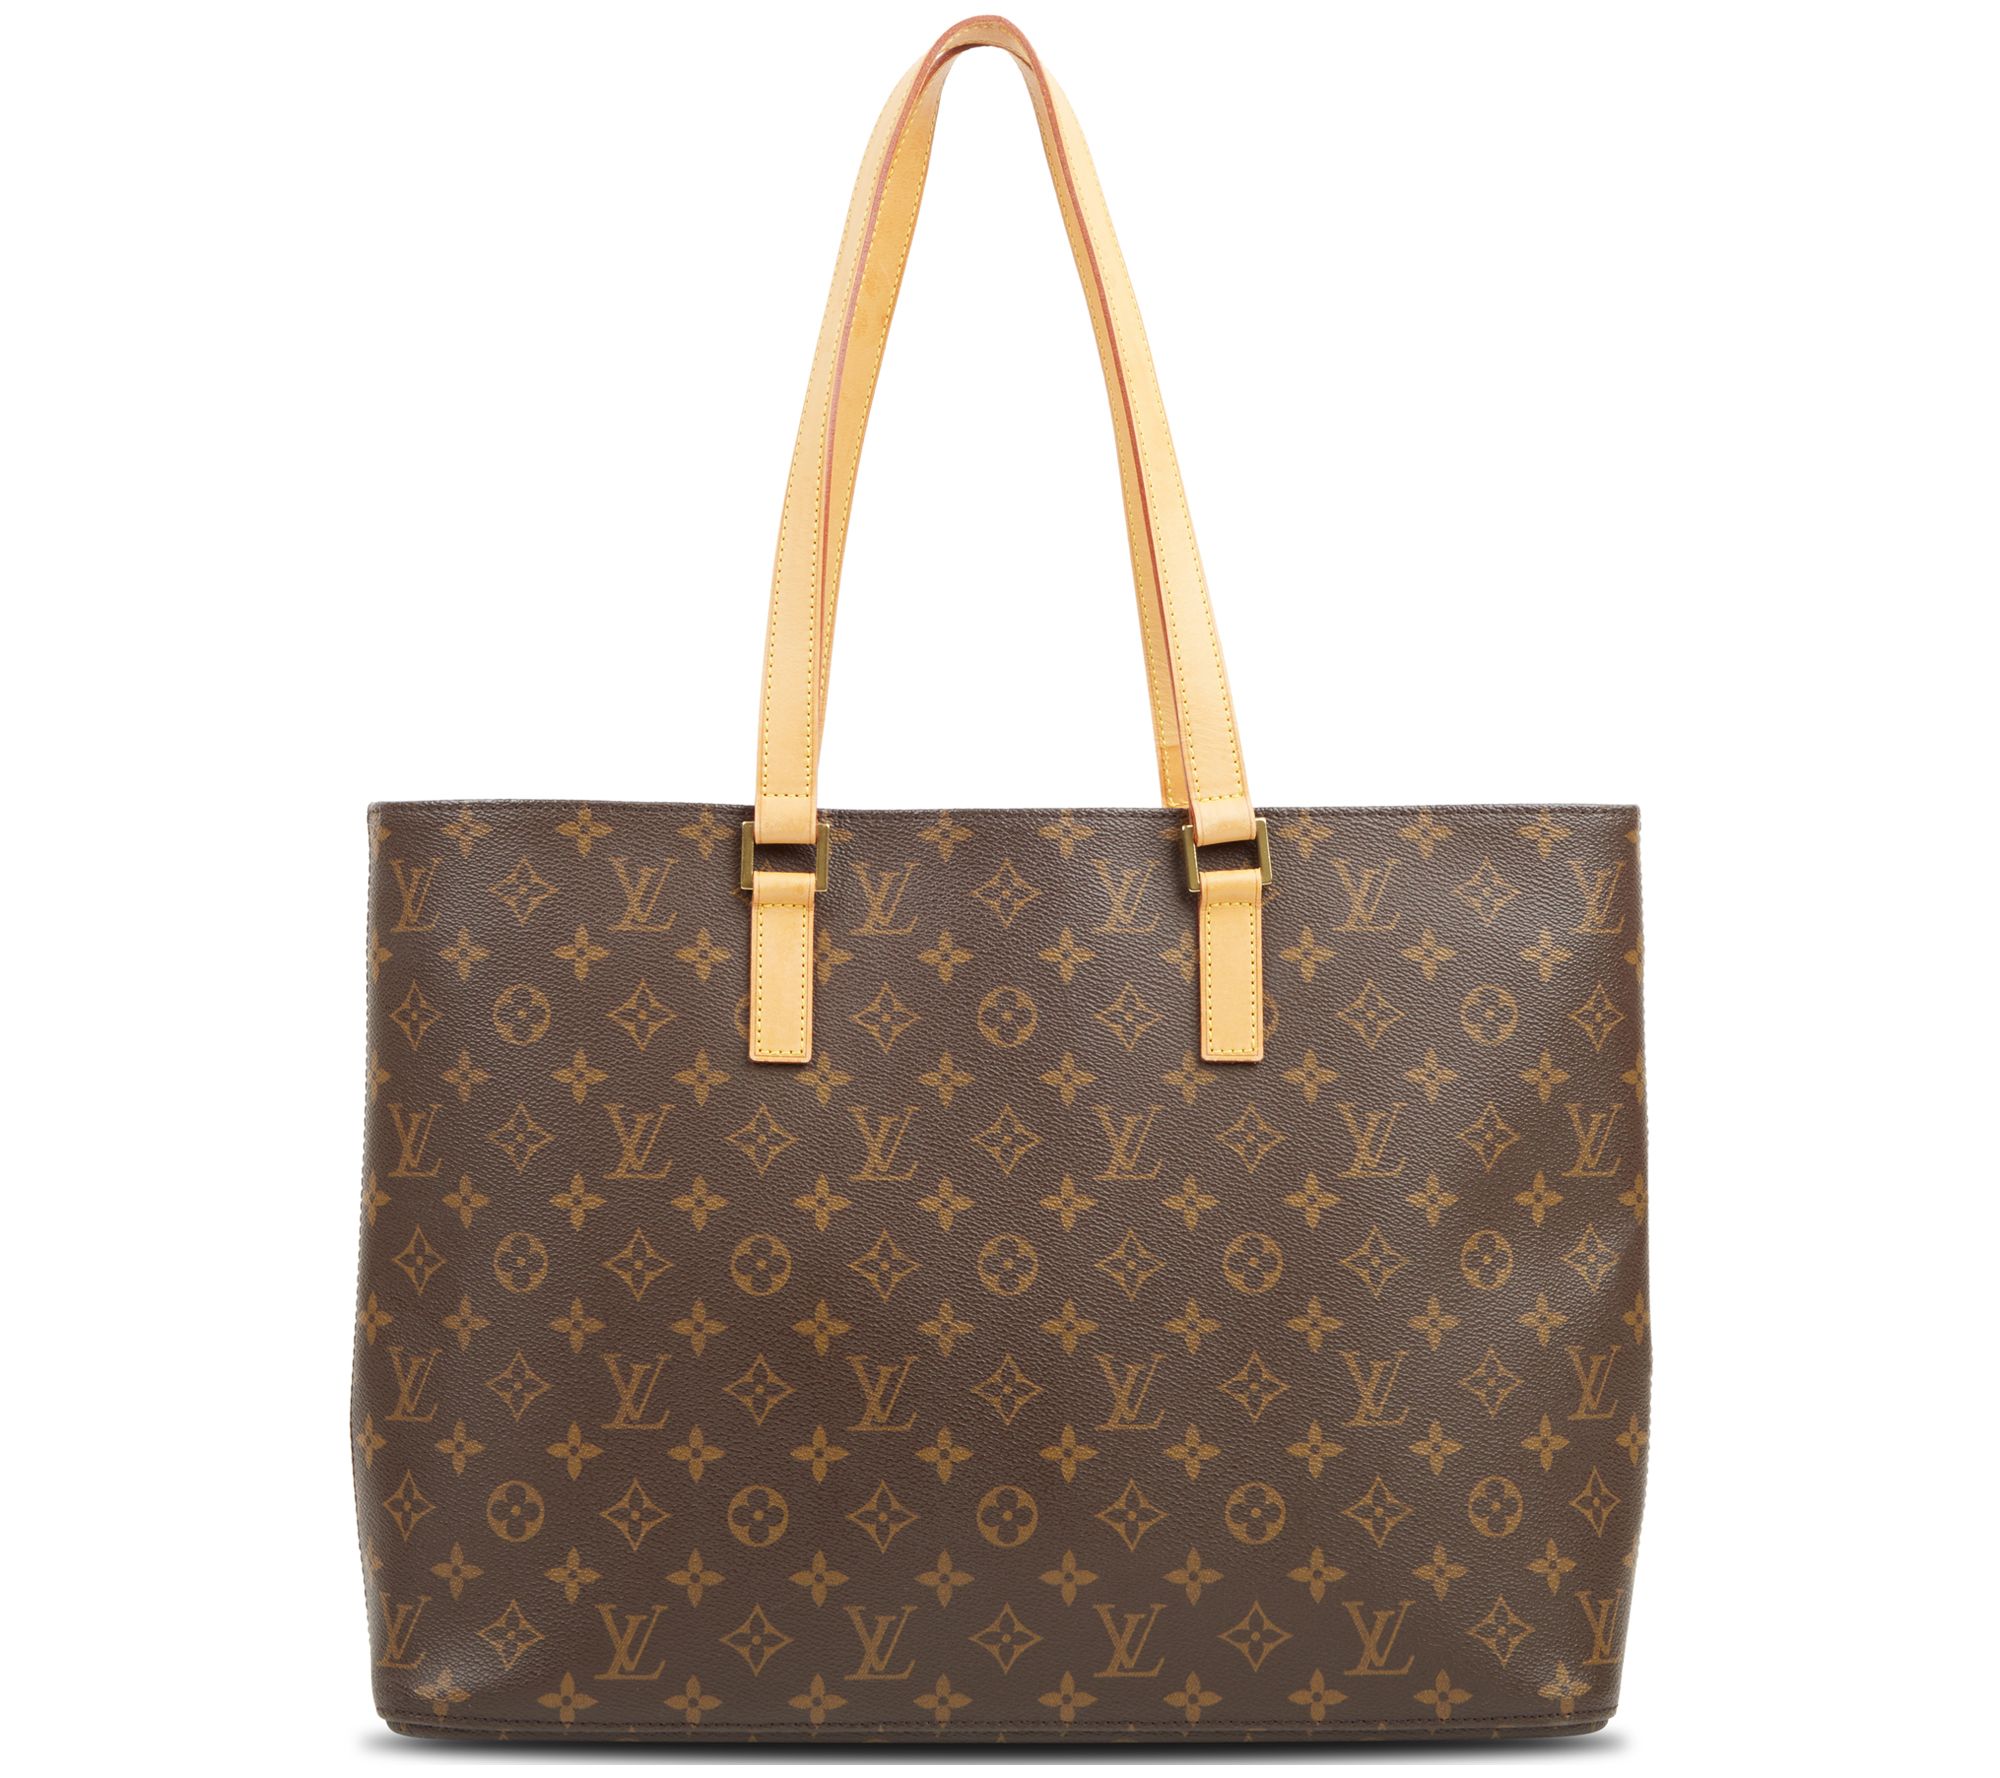 Louis Vuitton Black Leather And Monogram Canvas Limitless Ankle